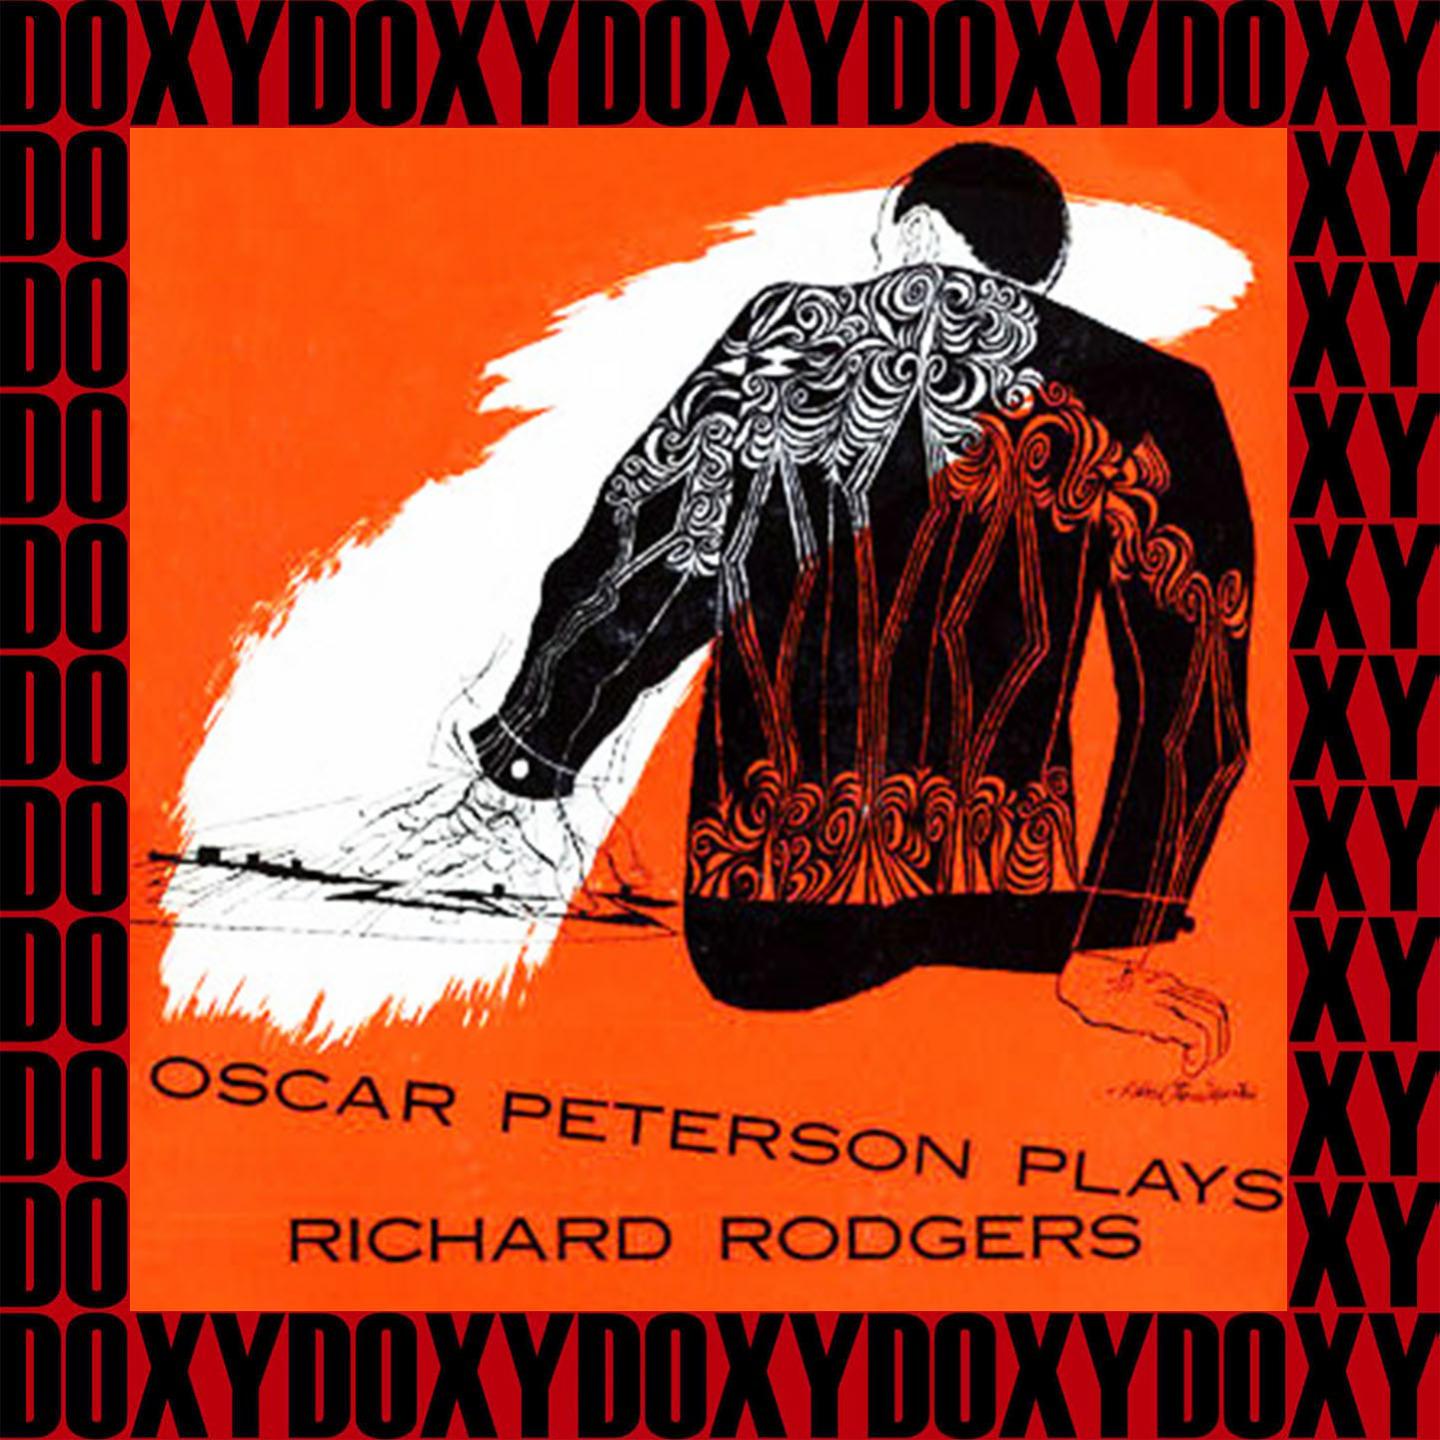 Plays Richard Rodgers (Remastered Version) (Doxy Collection)